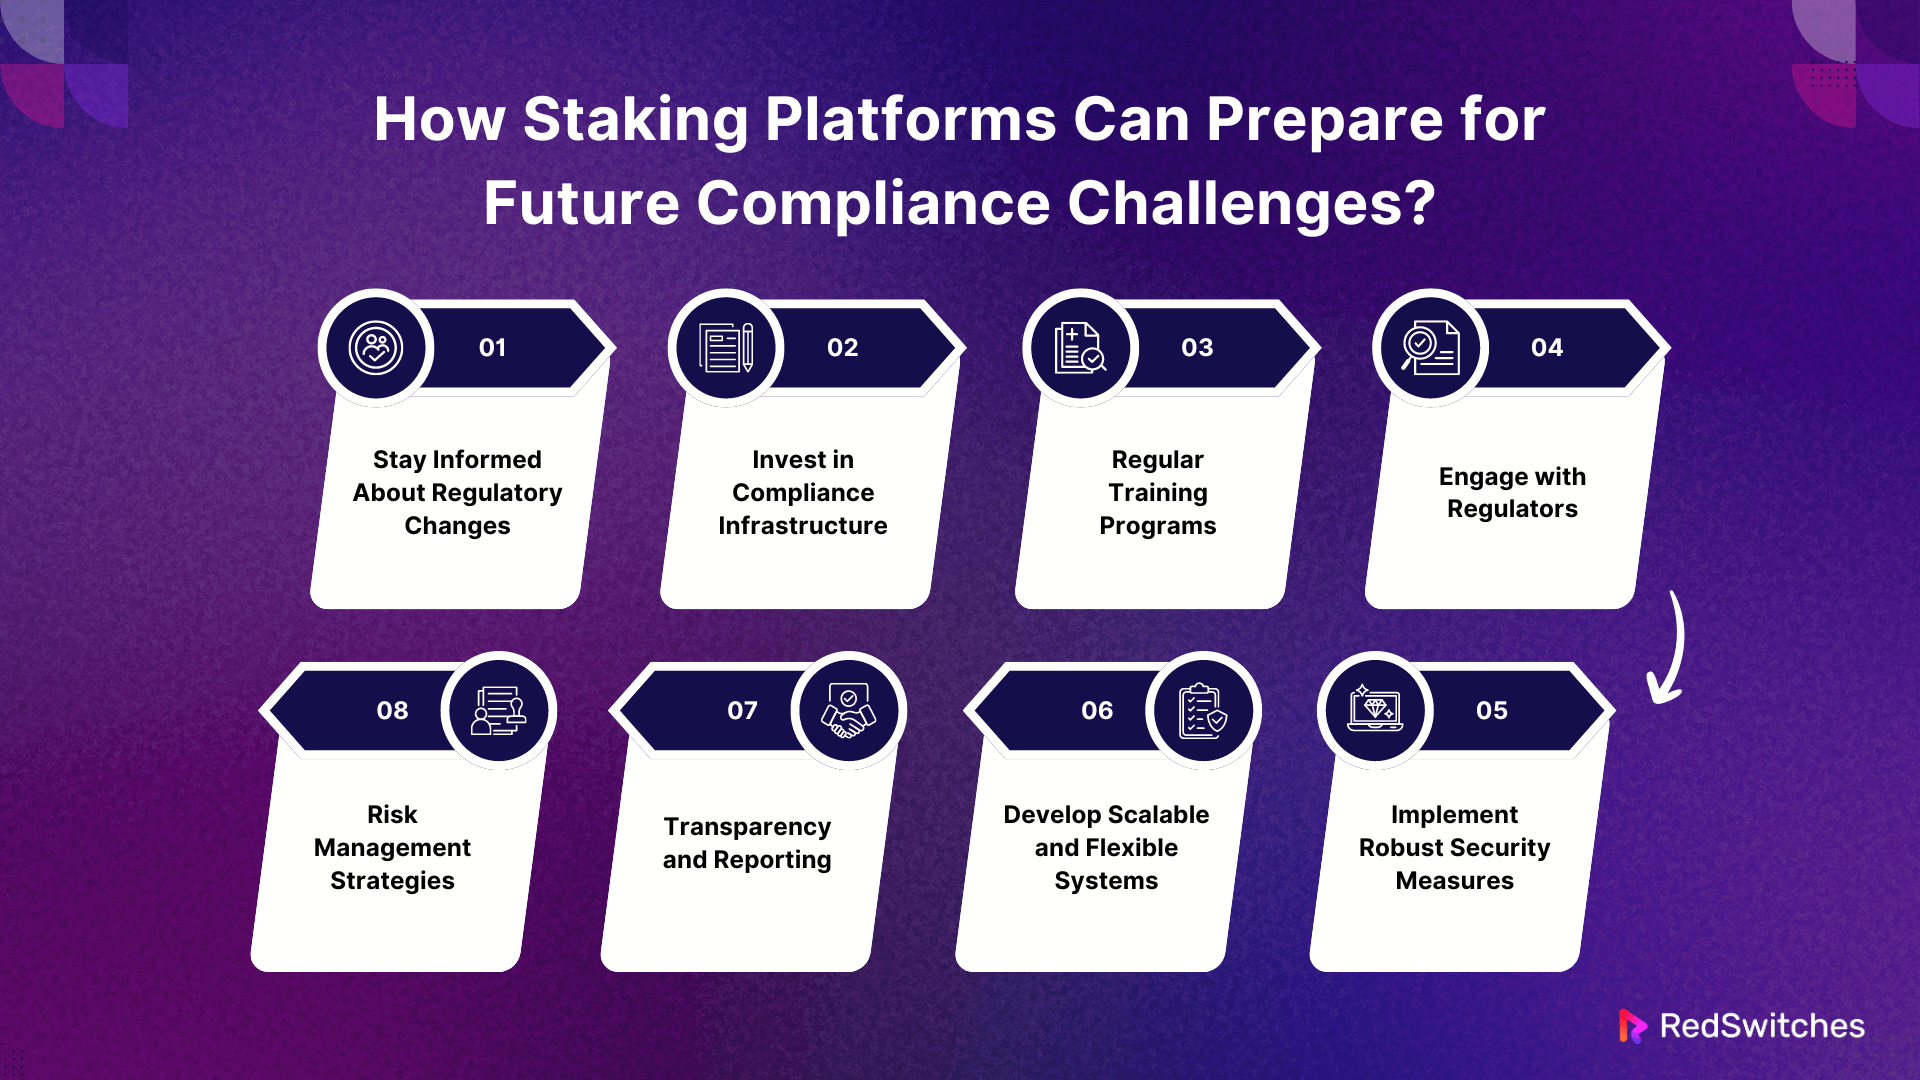 How Staking Platforms Can Prepare for Future Compliance Challenges?